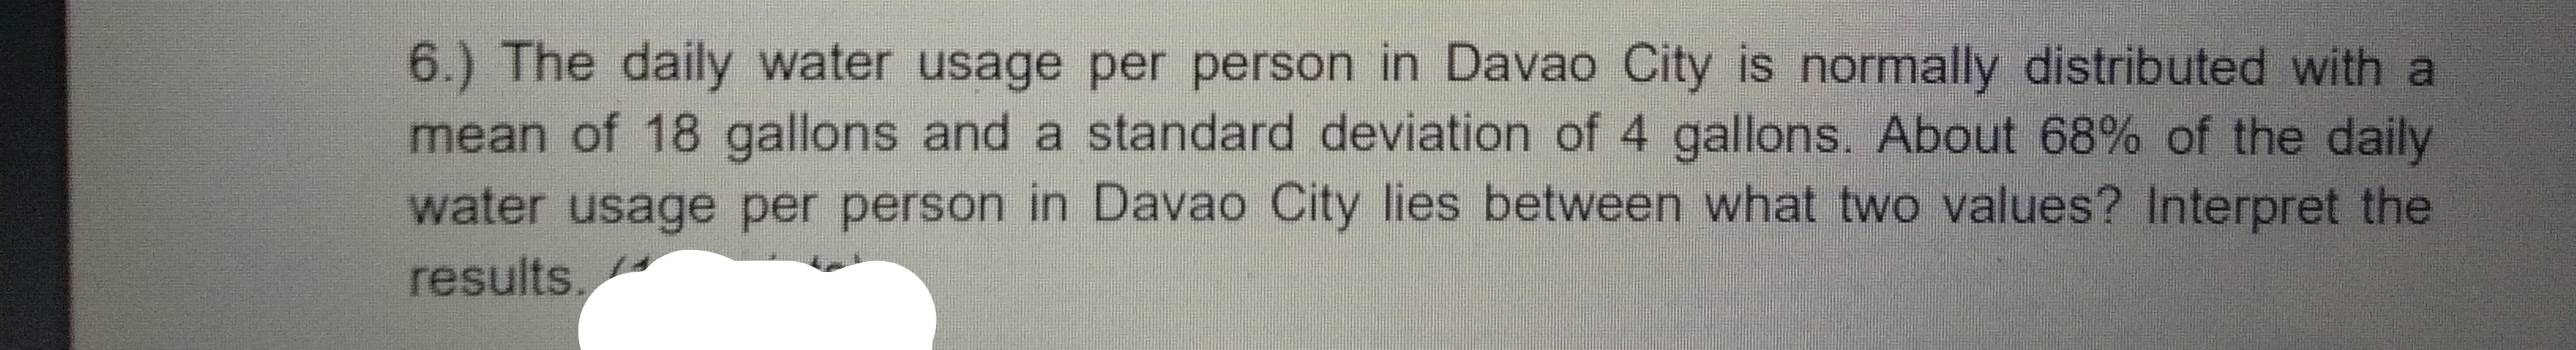 6.) The daily water usage per person in Davao City is normally distributed with a
mean of 18 gallons and a standard deviation of 4 gallons. About 68% of the daily
water usage per person in Davao City lies between what two values? Interpret the
results.
